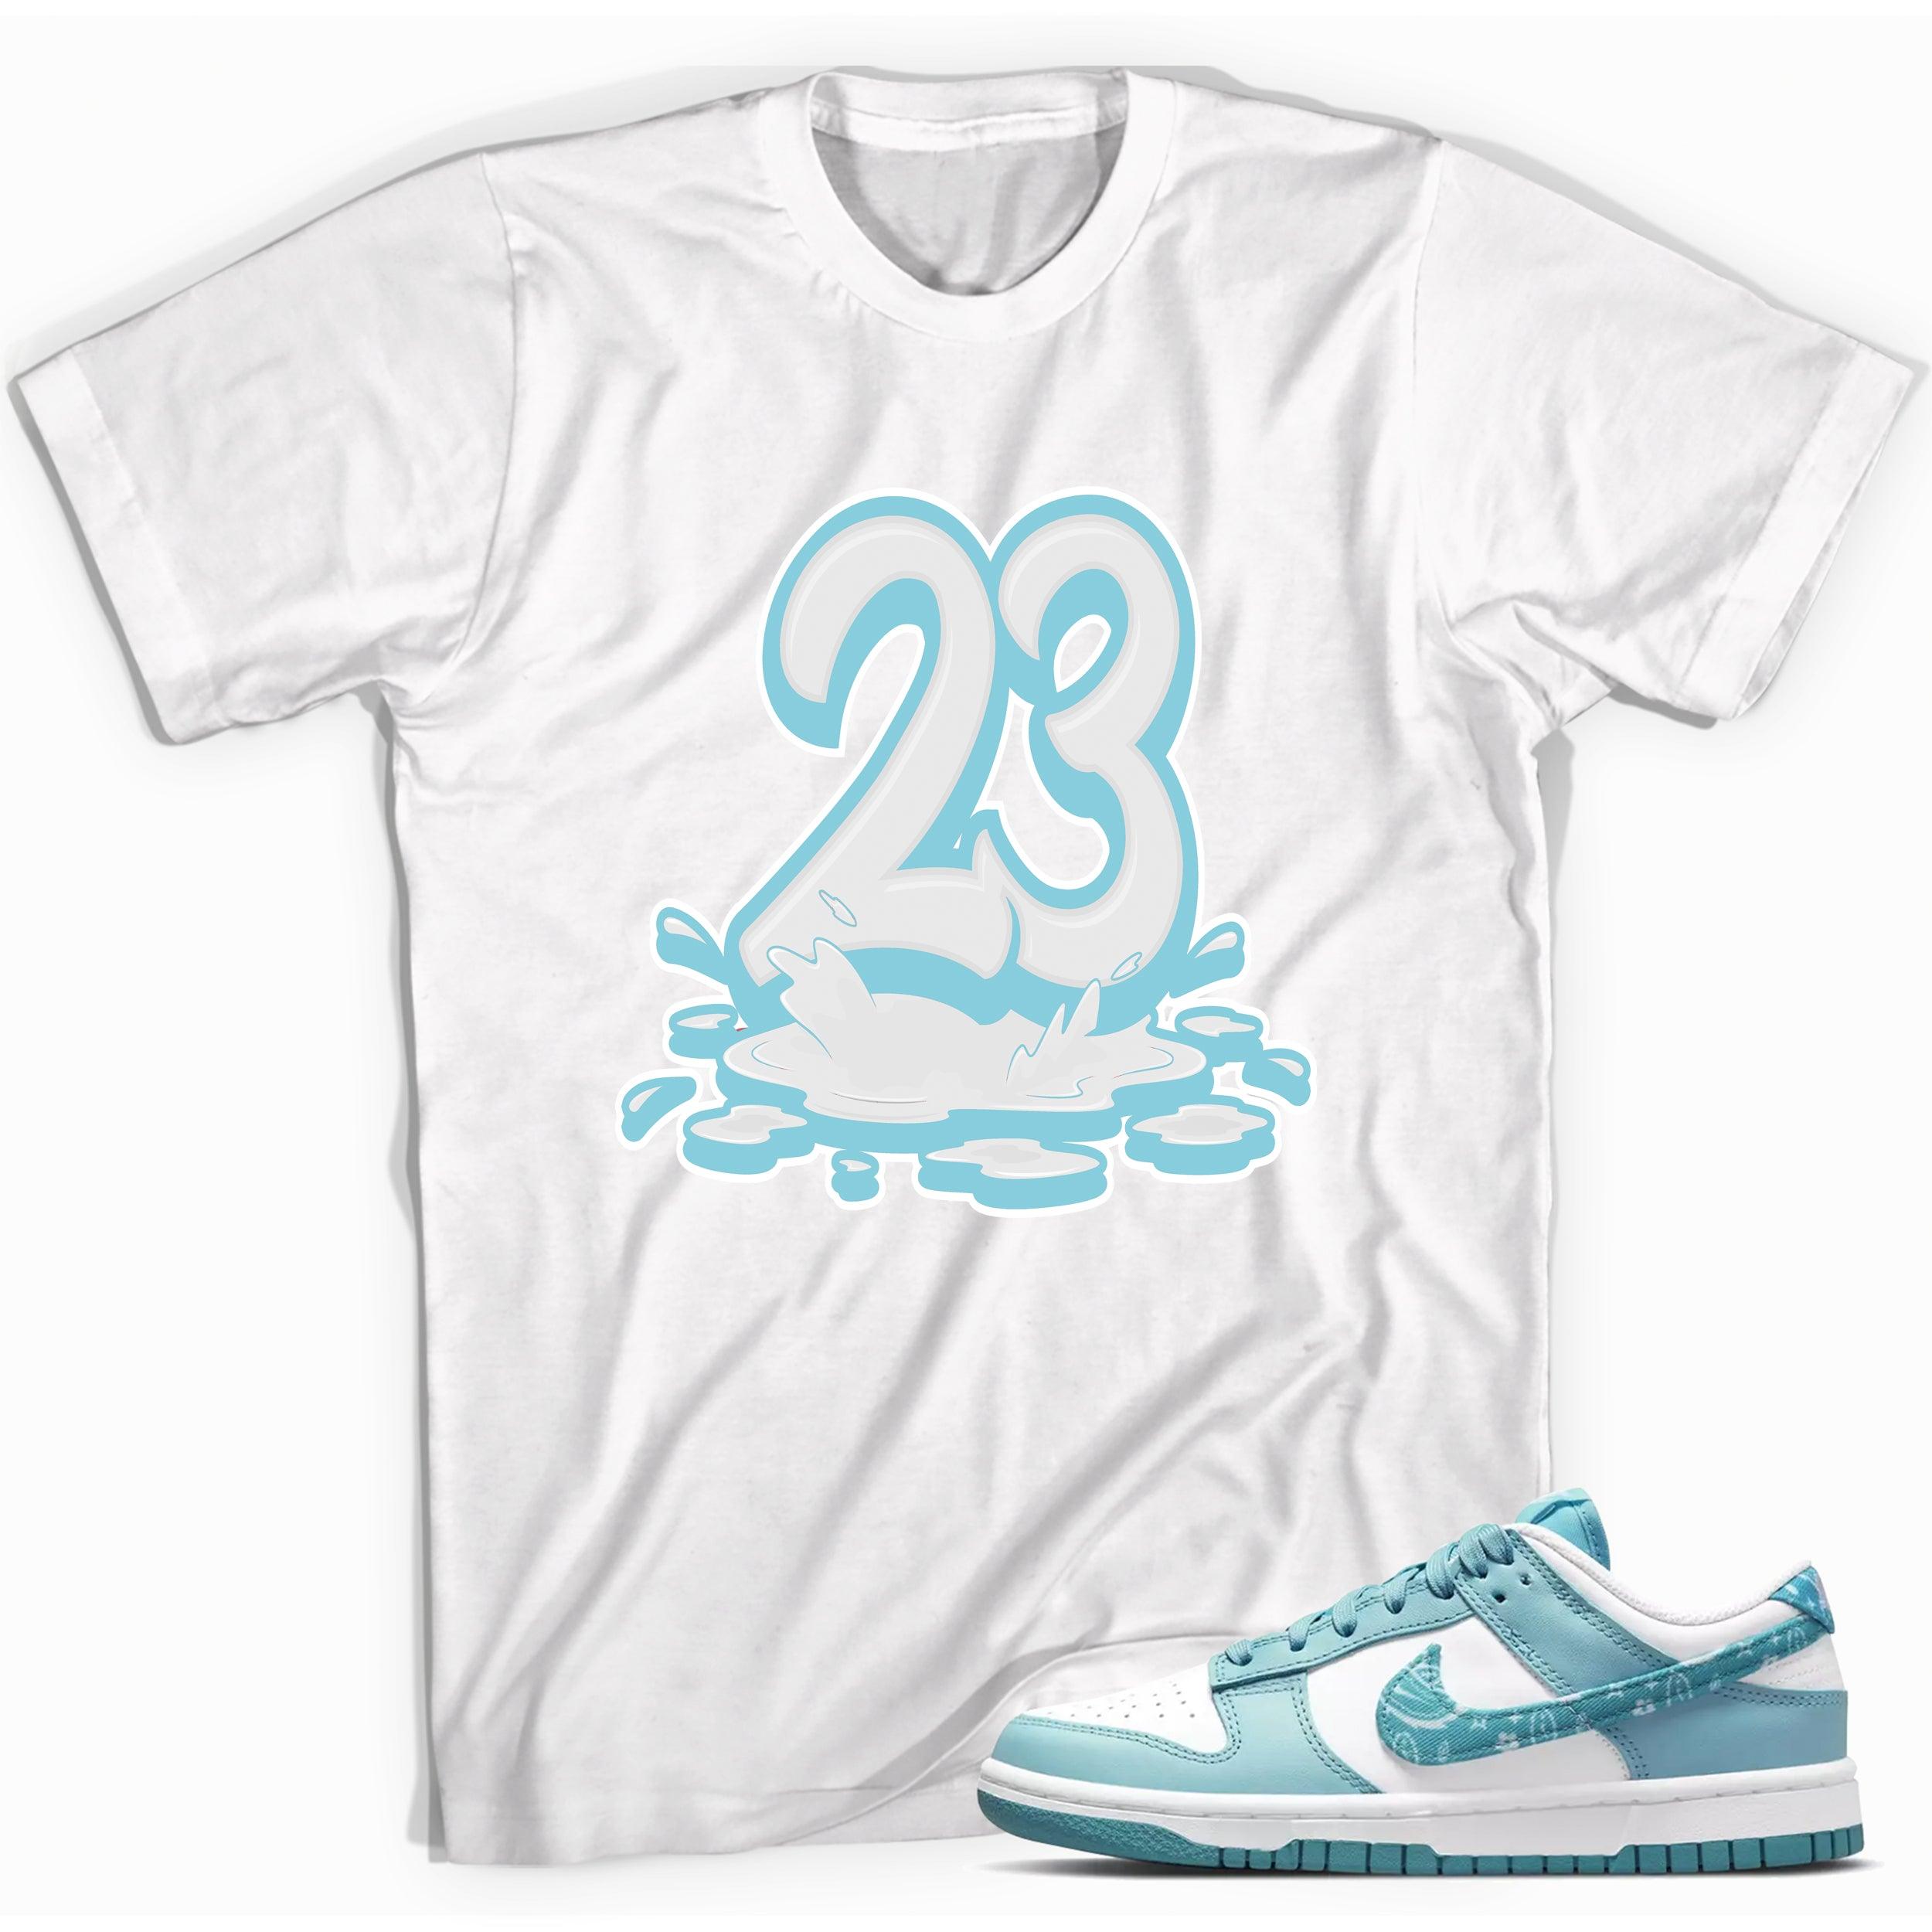 Number 23 Melting Shirt Dunk Low Essential Paisley Pack Worn Blue photo